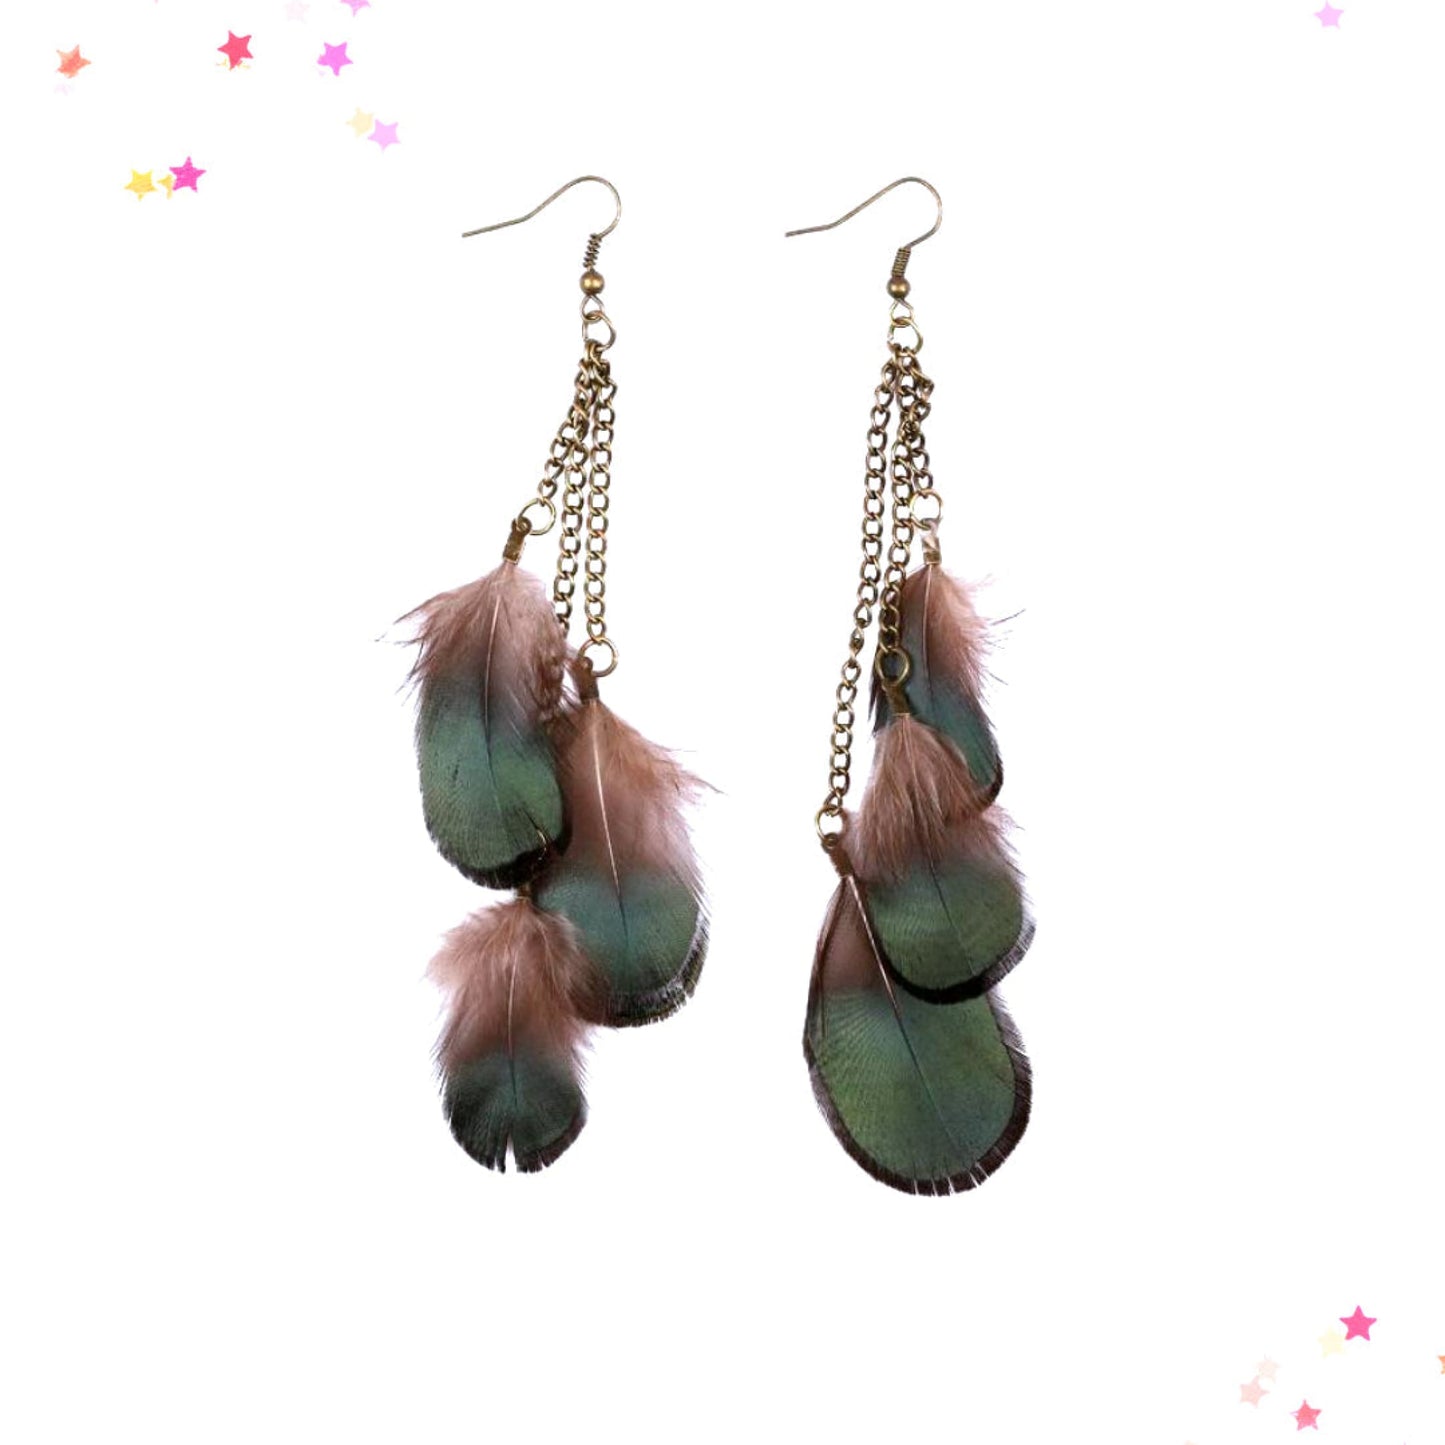 Boho Green Feather Dangle Earrings from Confetti Kitty, Only 12.99